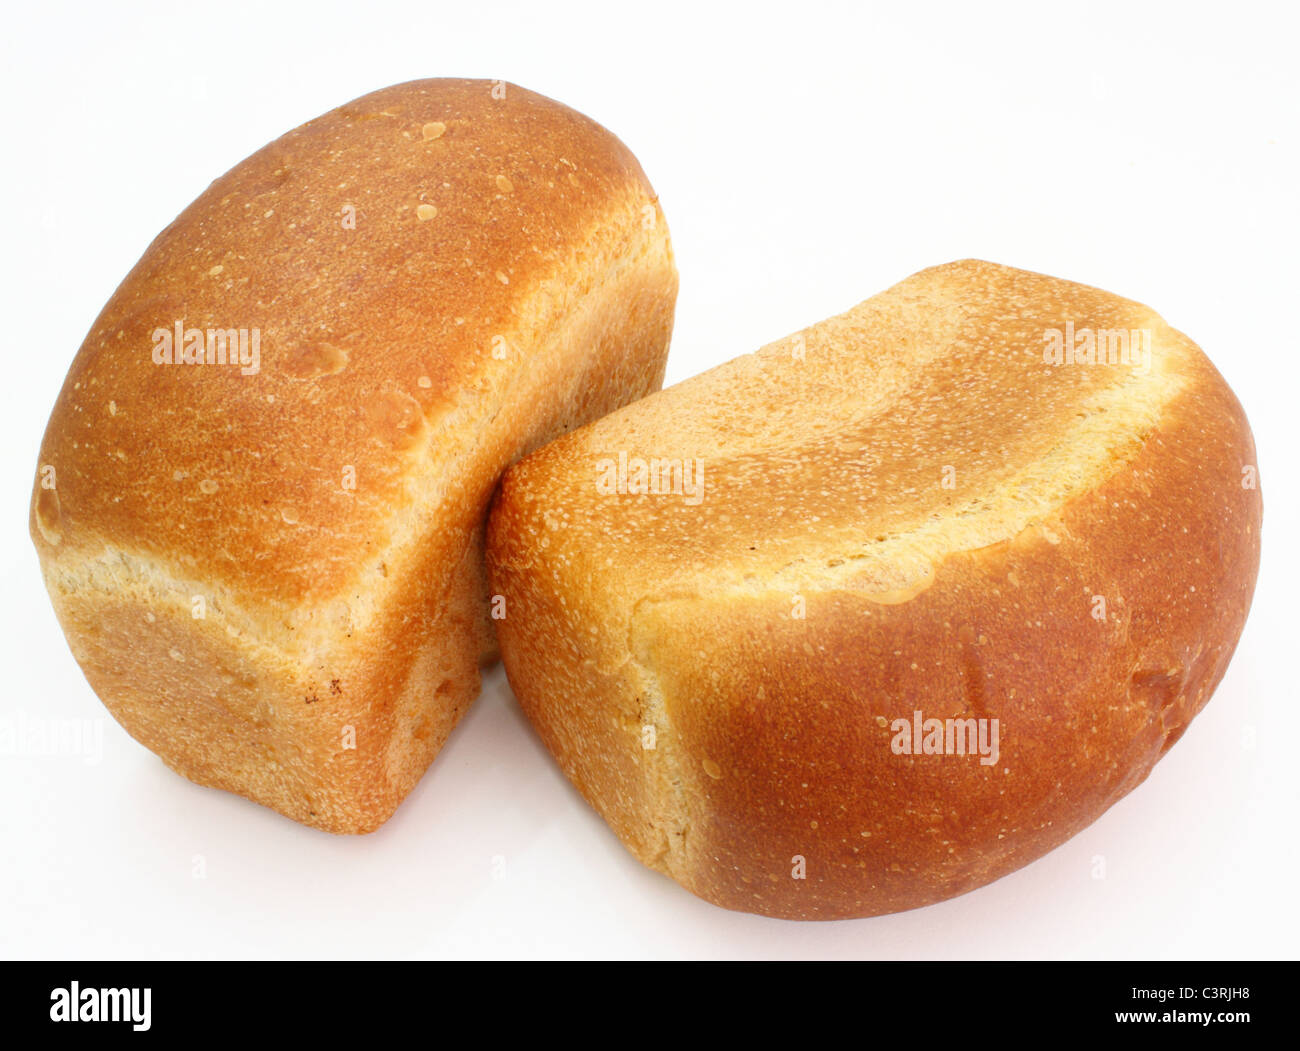 The ruddy long loaf of bread with the fried crust is isolated on a white background Stock Photo